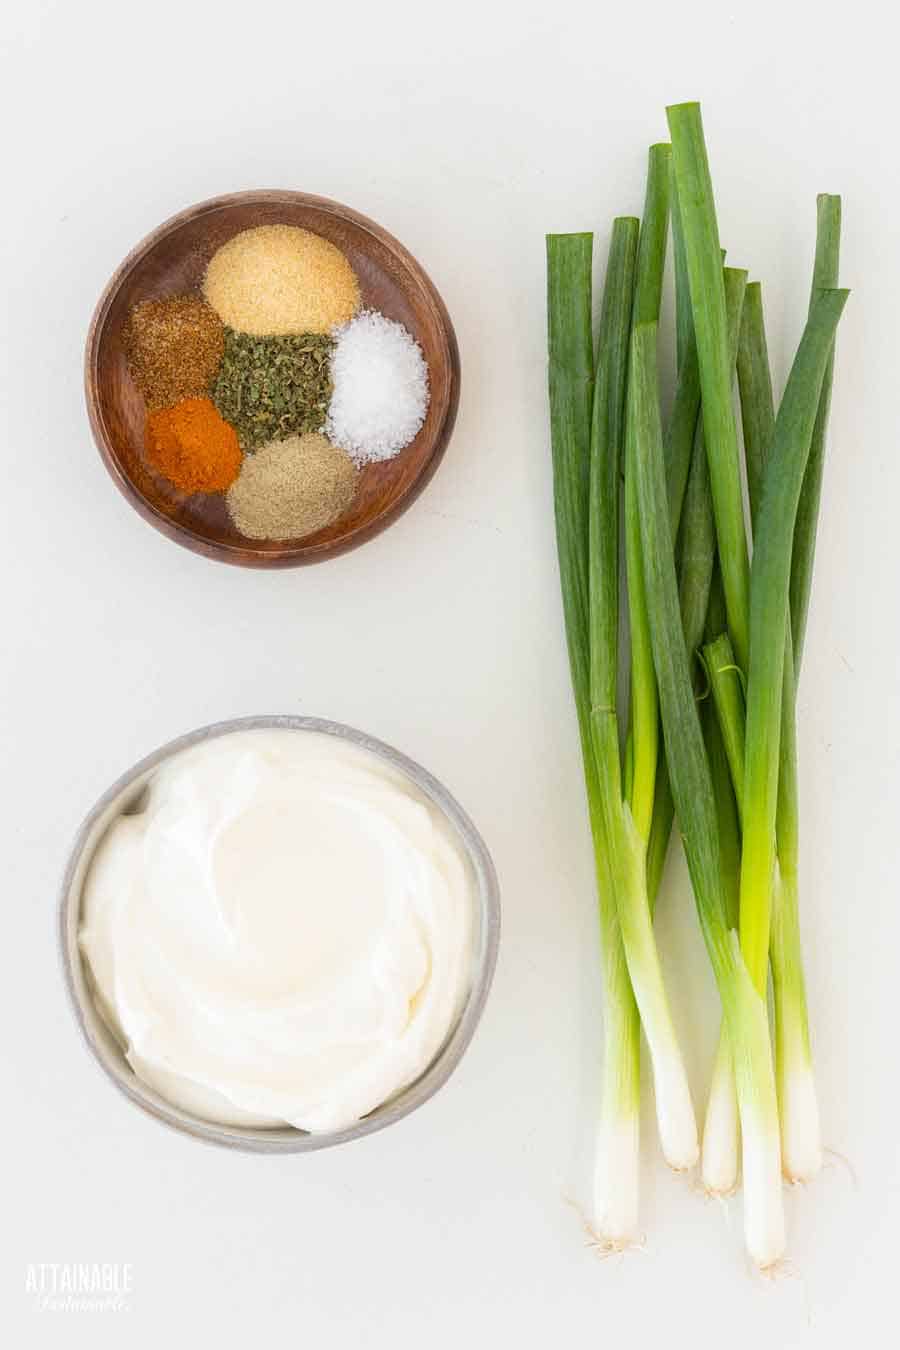 ingredients for making green onion dip: seasonings, sour cream, and fresh green onions.